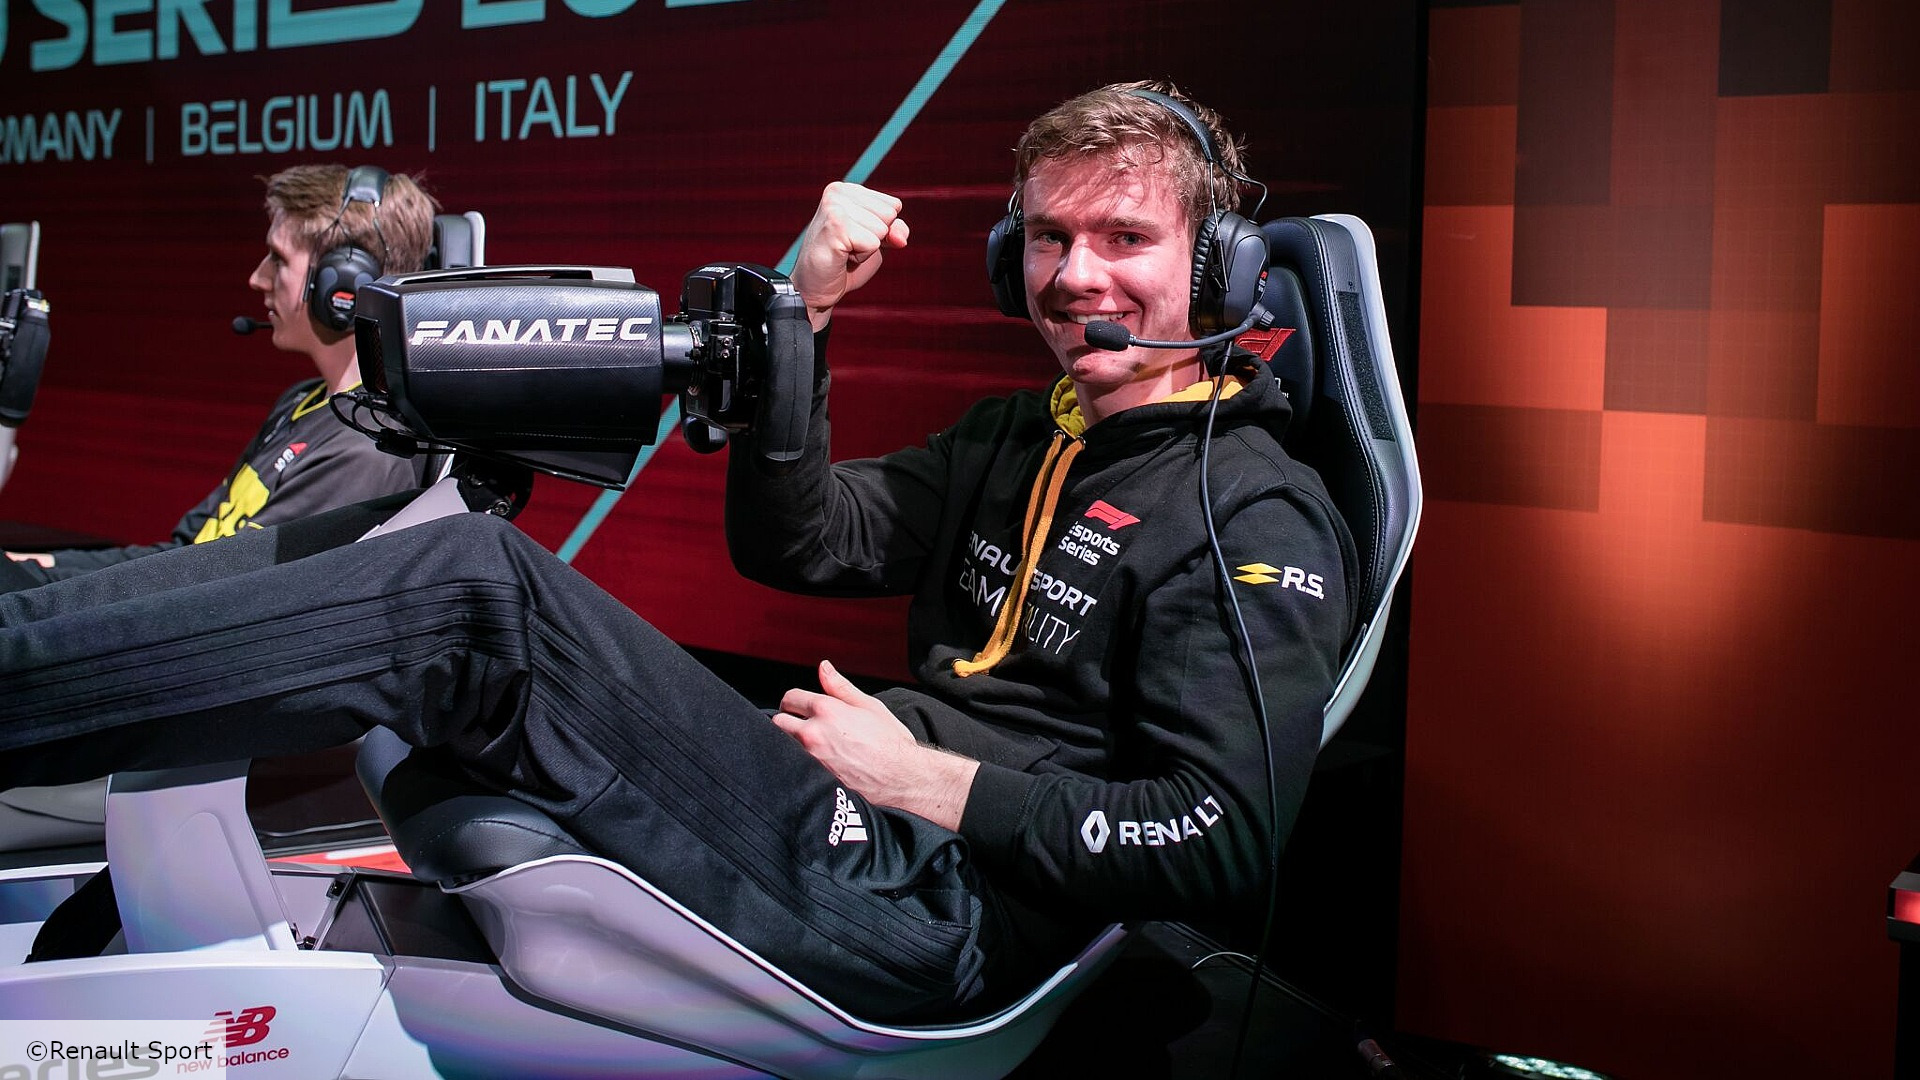 Renault Sport Team Vitality’s drivers talk the Pro Series, favourite